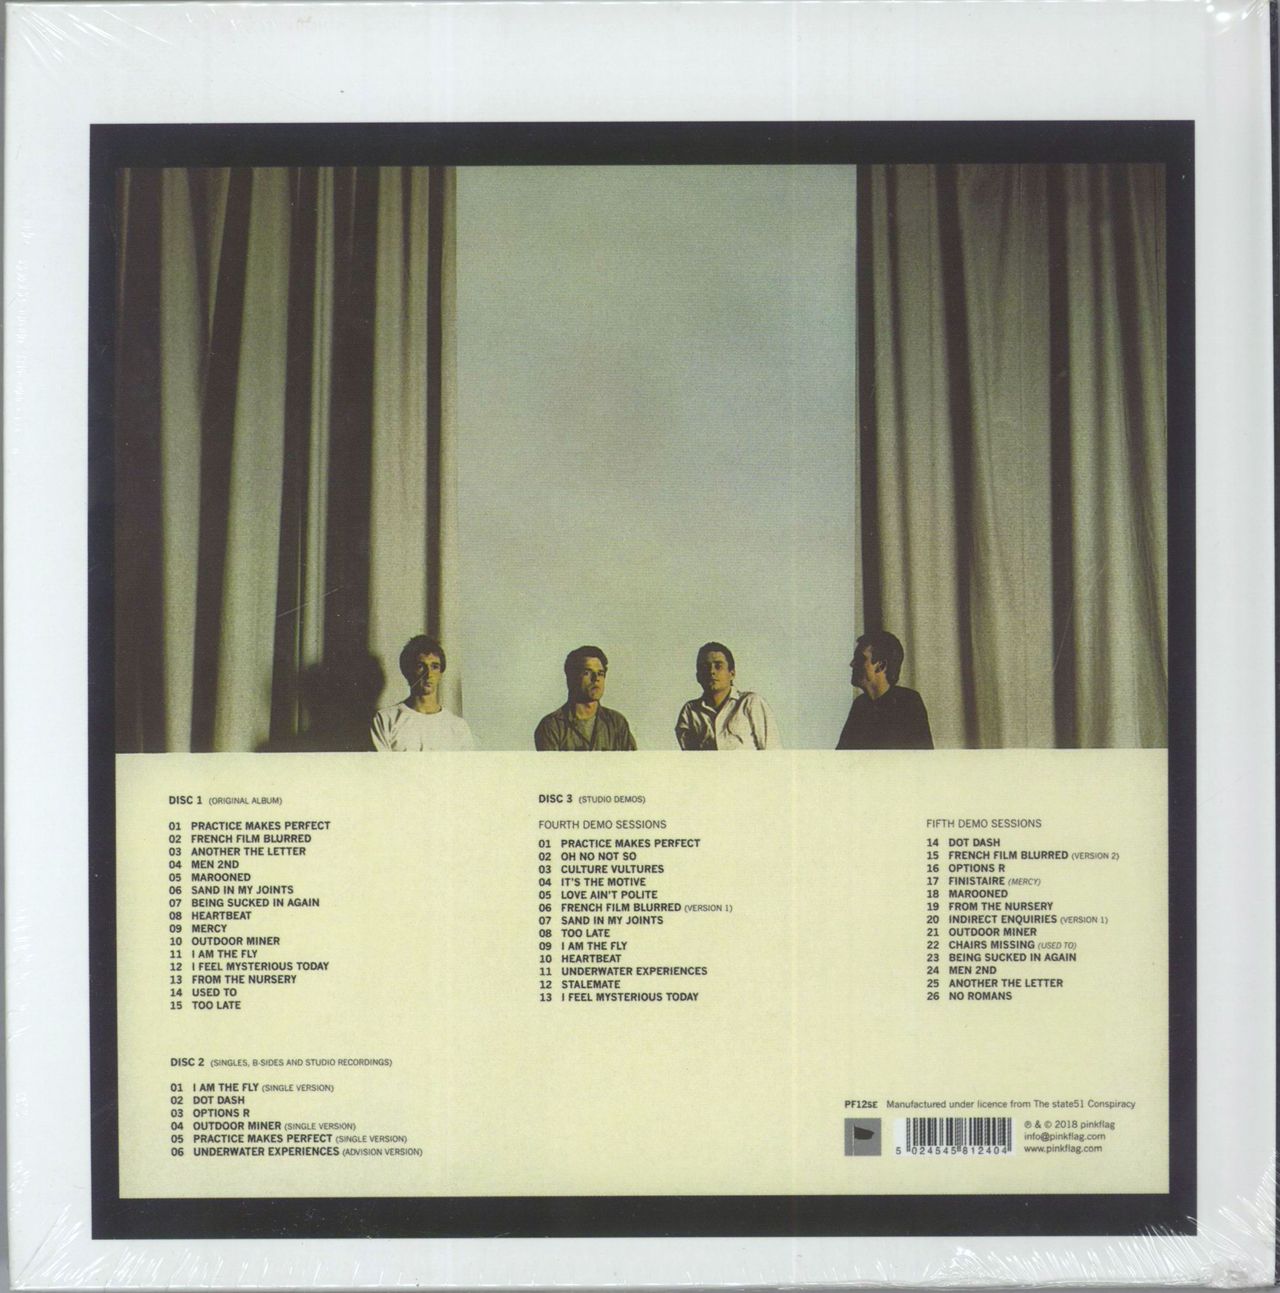 Missing　Chairs　album　Edition　sealed　Special　Cd　UK　set　—　Wire　box